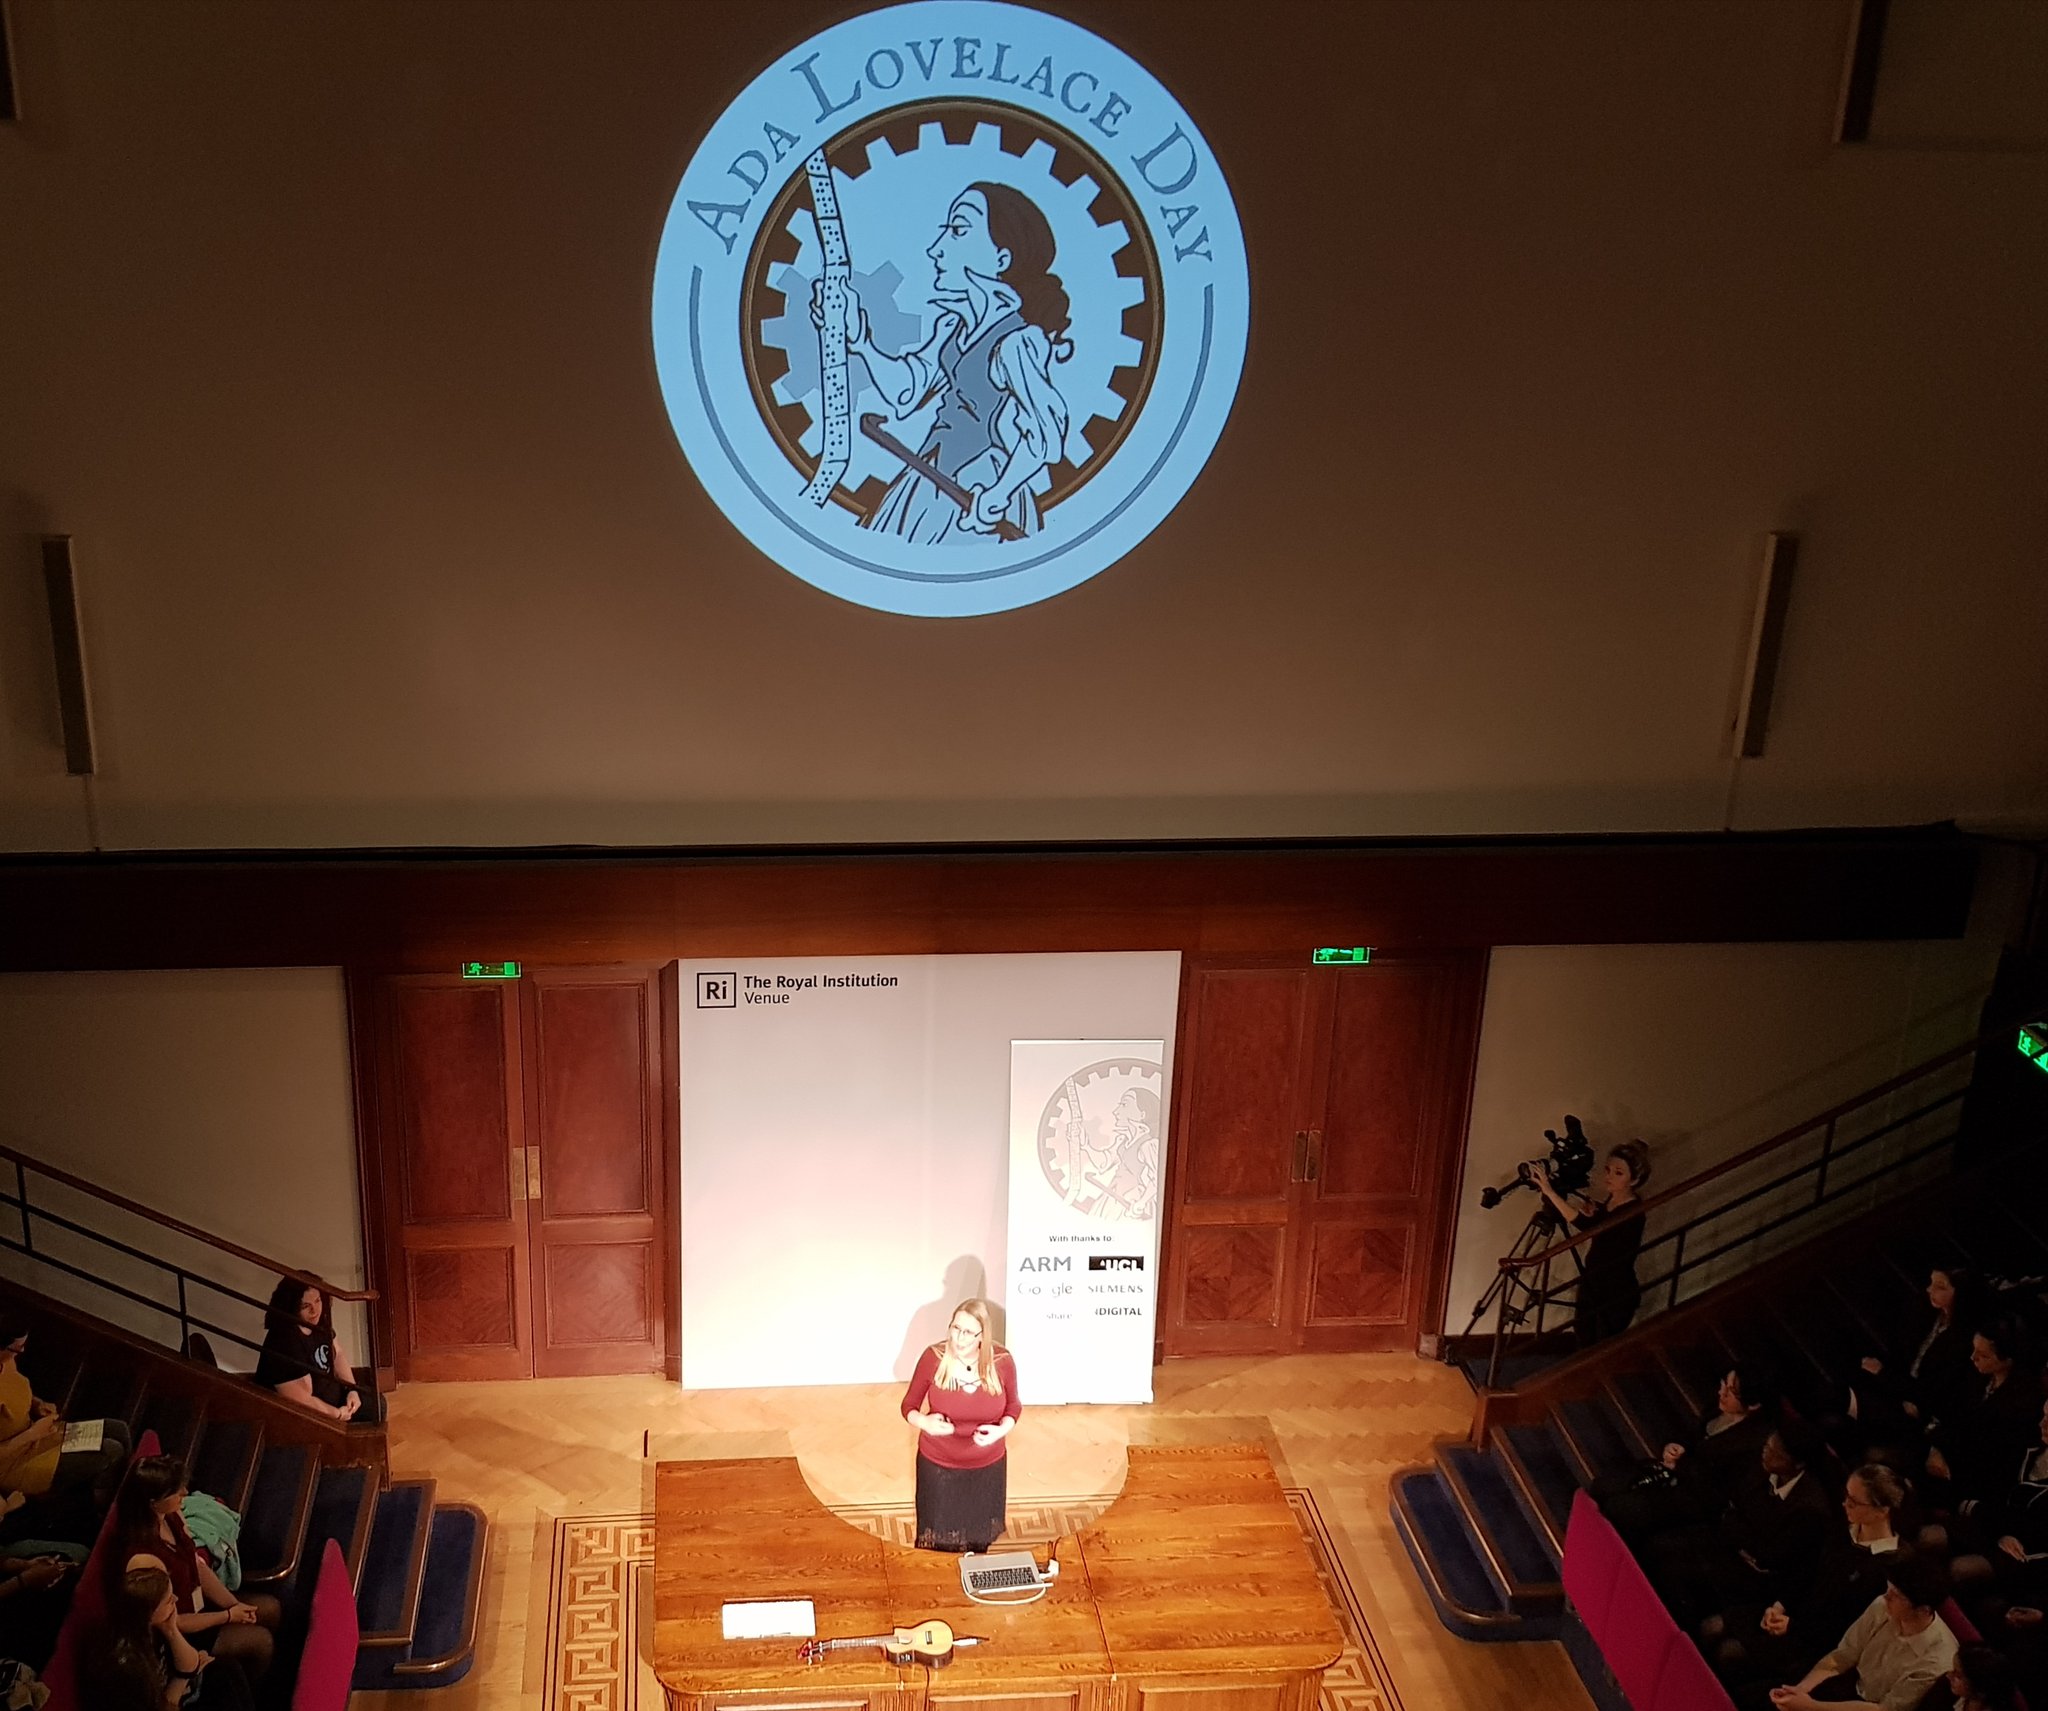 Ada Lovelace Day Live! At @Ri_Science #ald17 https://t.co/9w4pqWcVxG